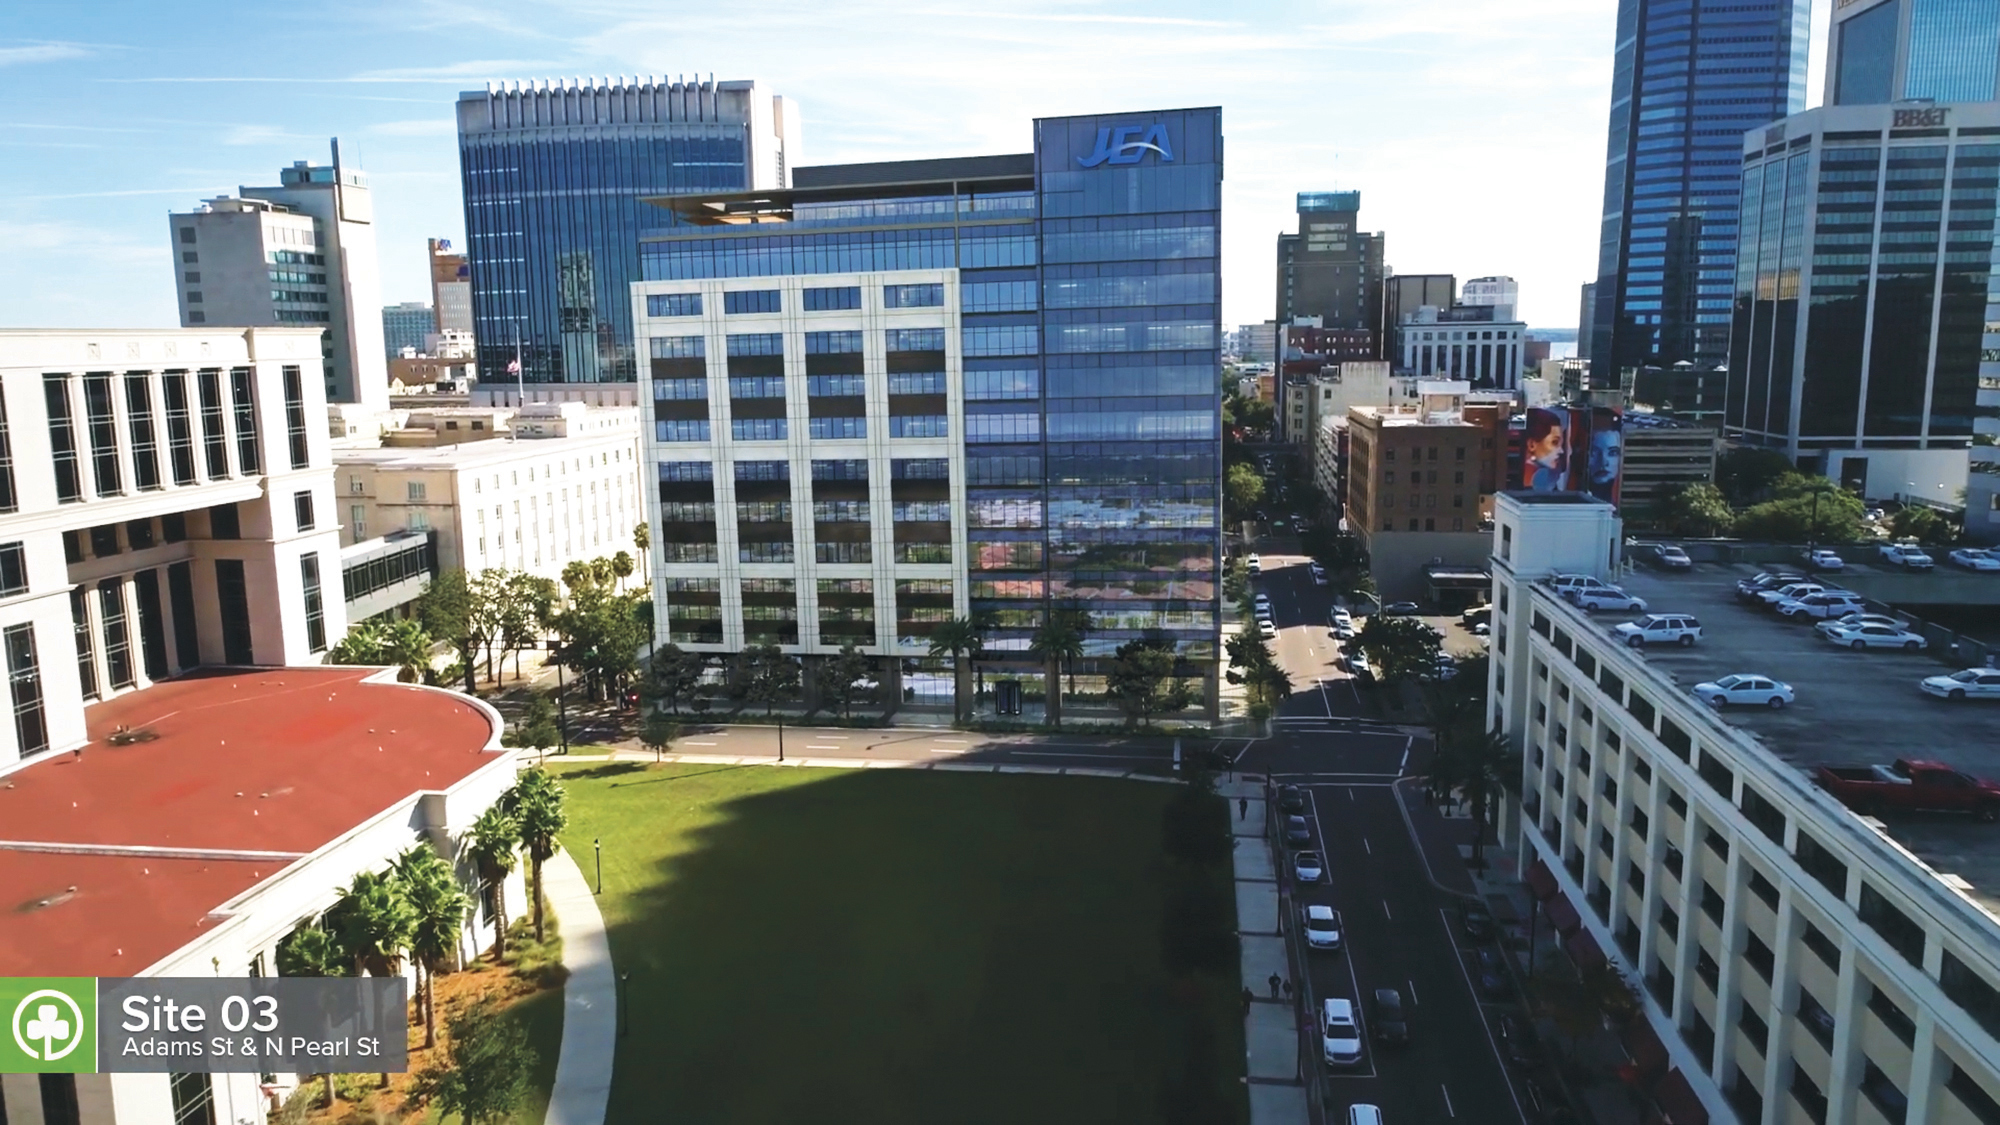 Ryan Companies US Inc. proposes to keep JEA in Downtown’s central business district near the Duval County Courthouse.